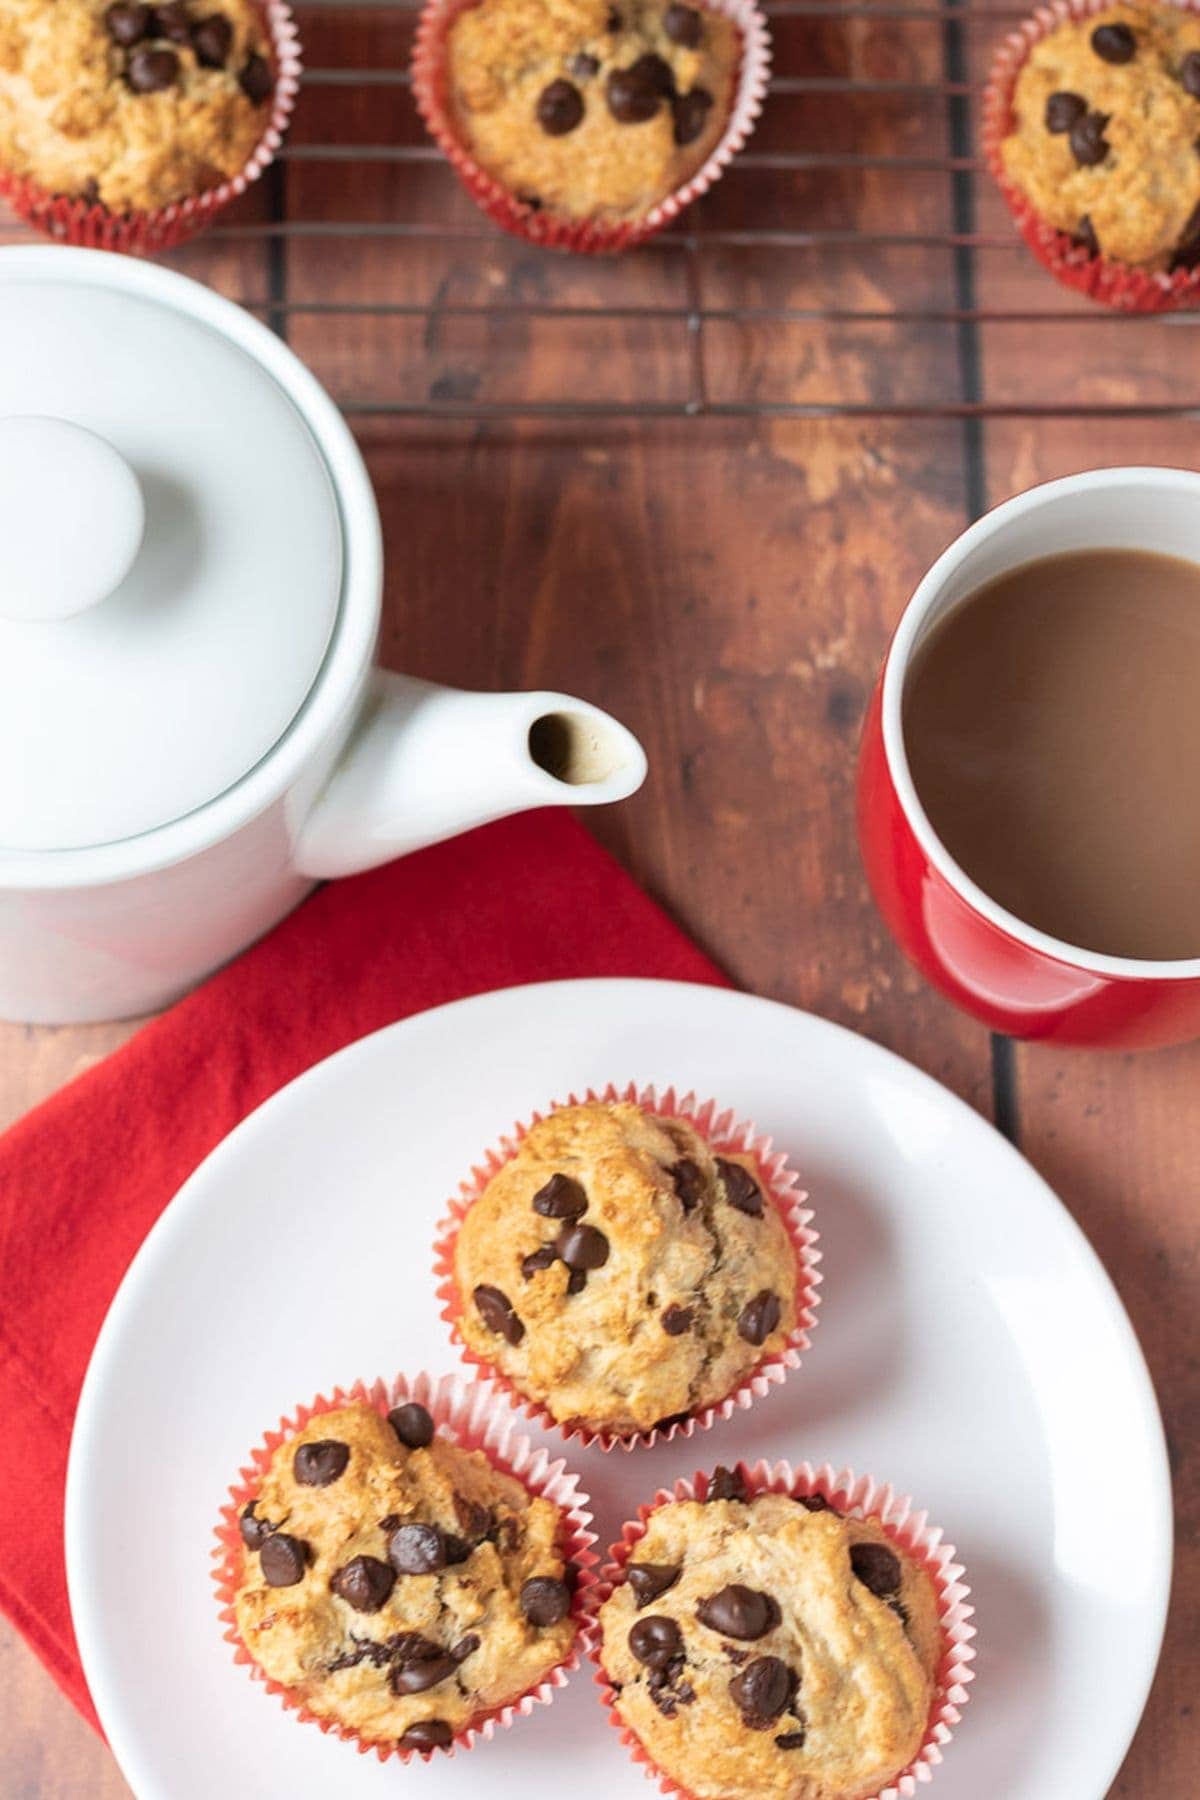 Birds eye view of a plate of wholemeal sugar free muffins with chocolate chips. Teapot, cup of tea and rack of muffins cooling at the top.